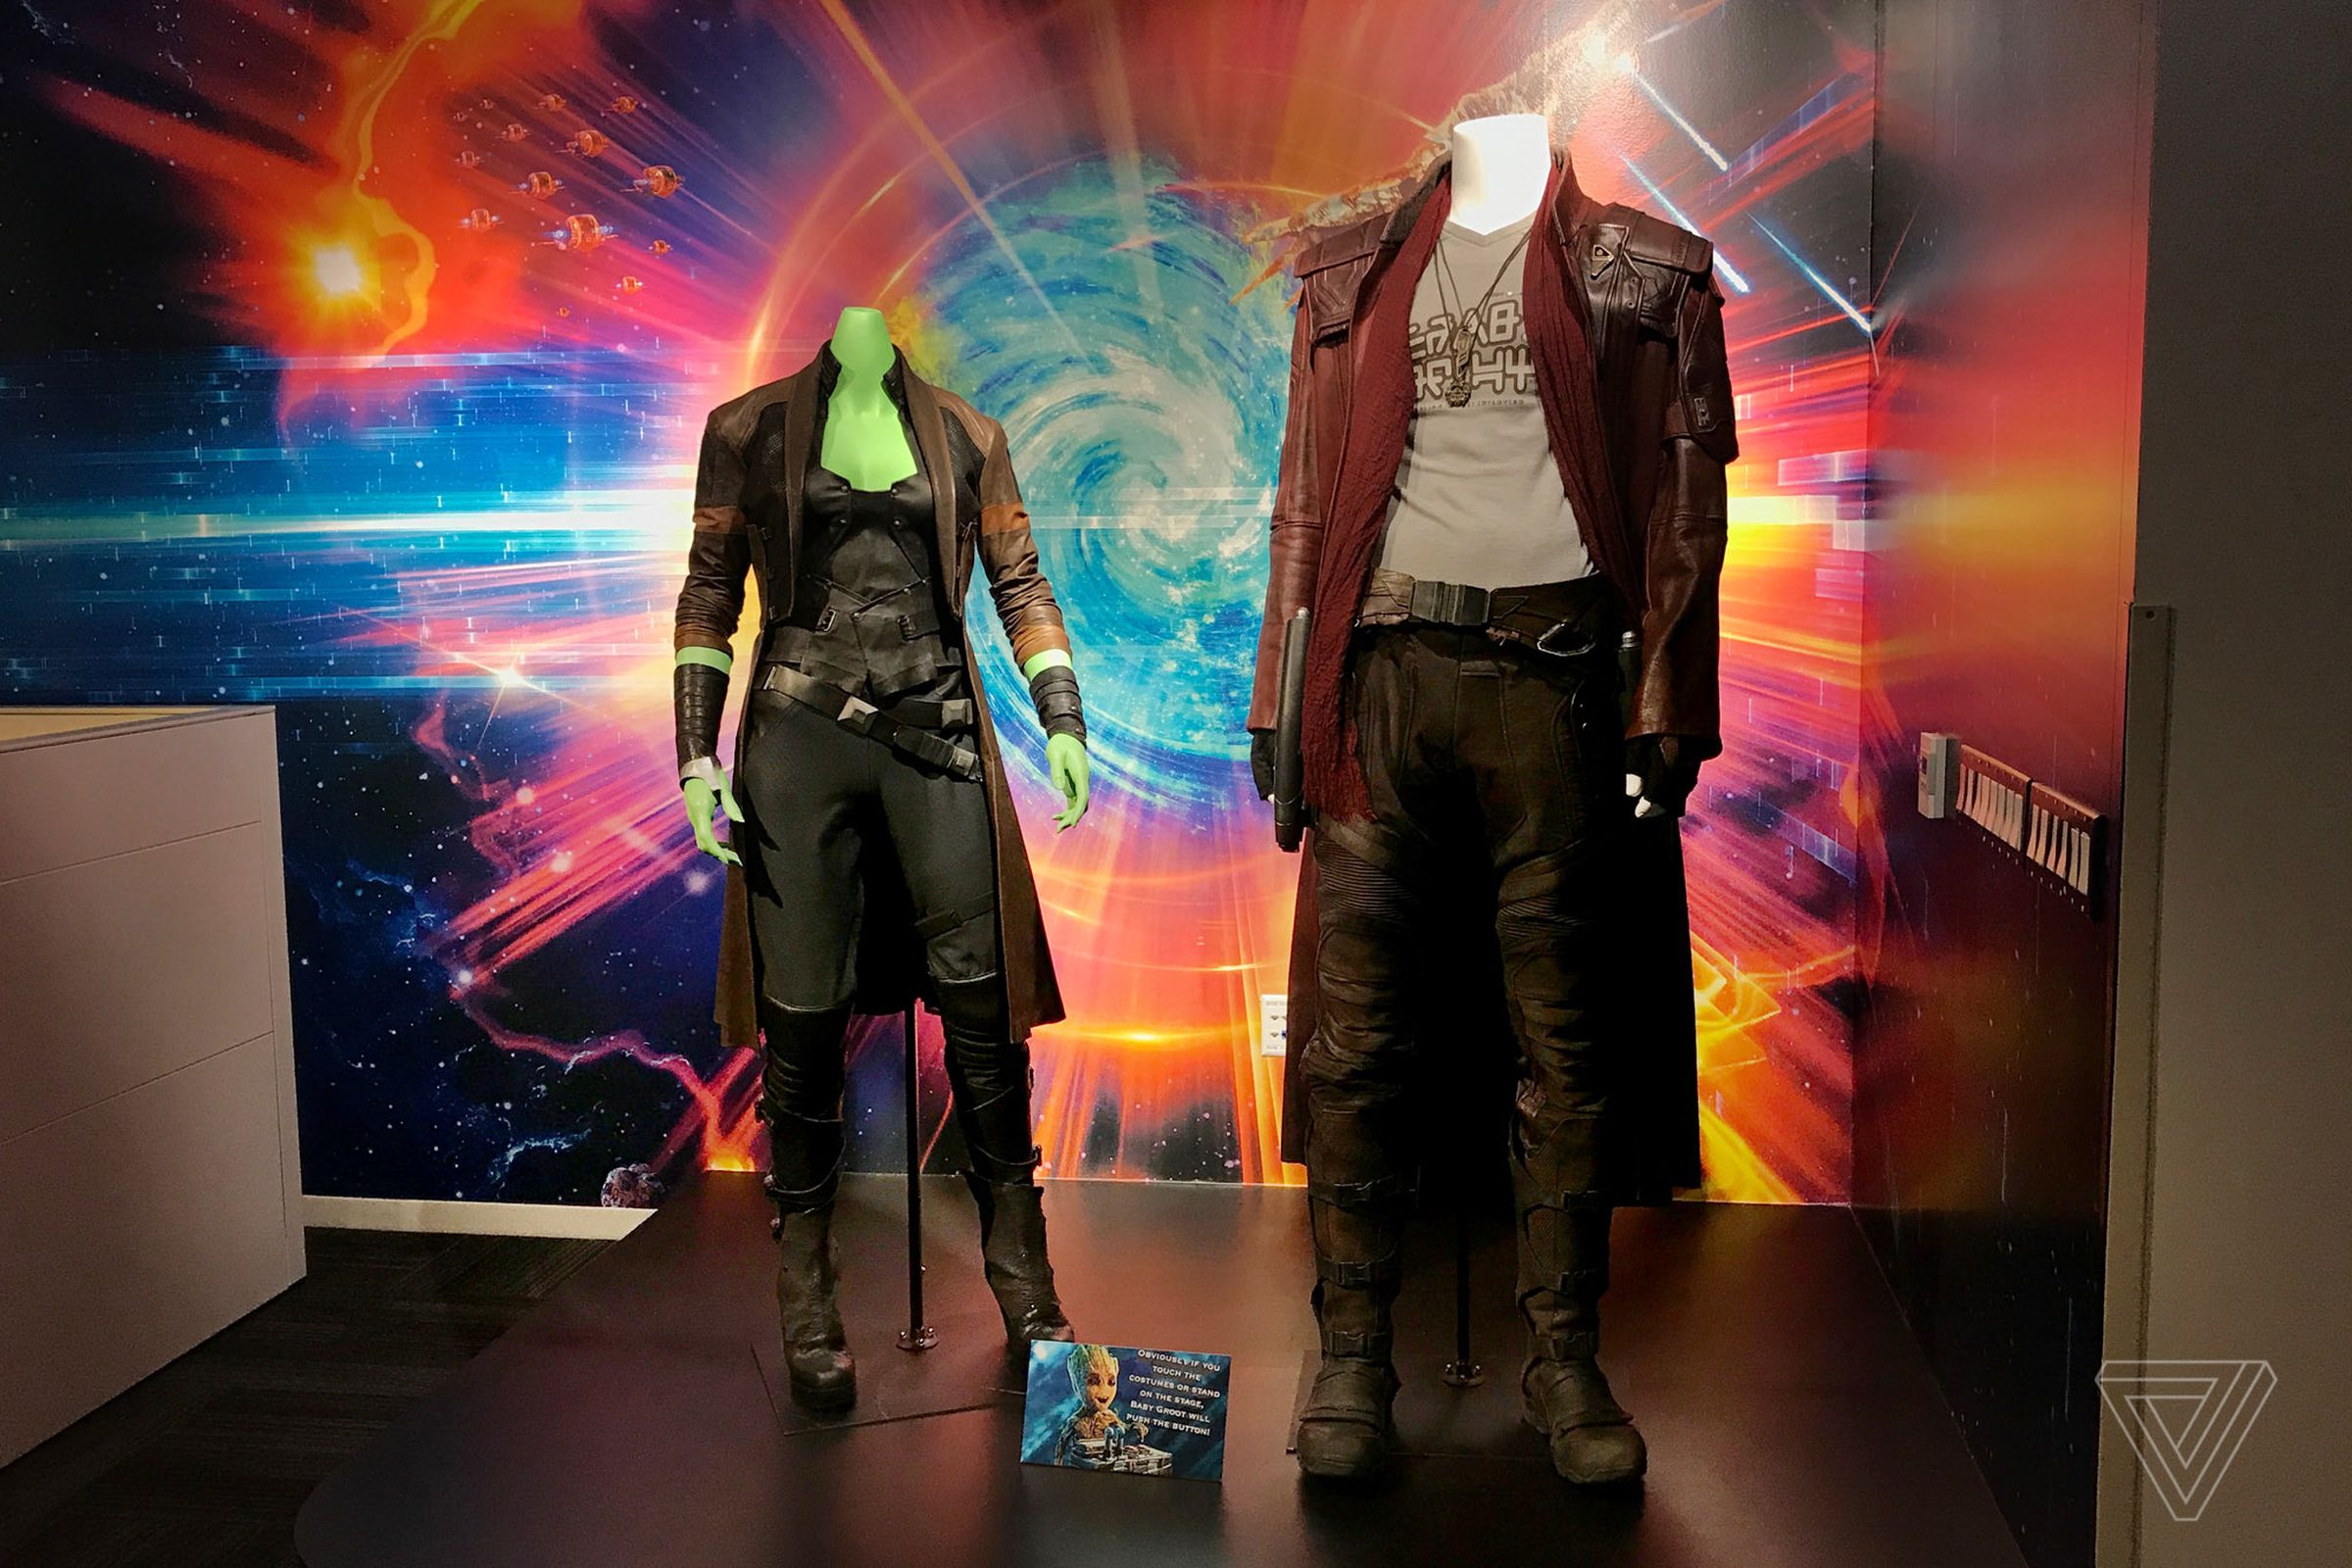 Guardians of the Galaxy costumes in Marvel’s lobby.